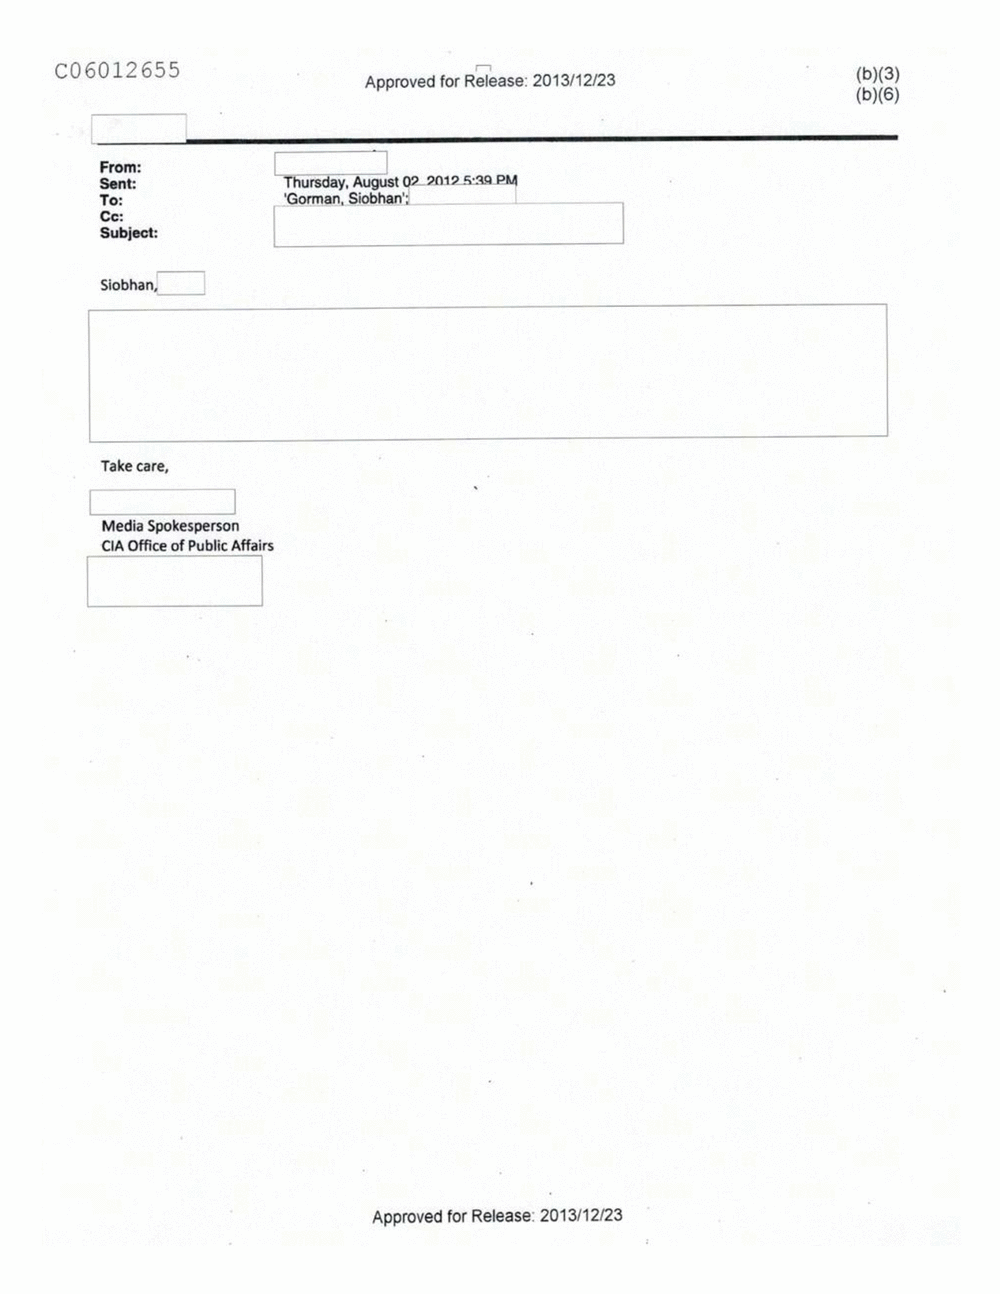 Page 232 from Email Correspondence Between Reporters and CIA Flacks